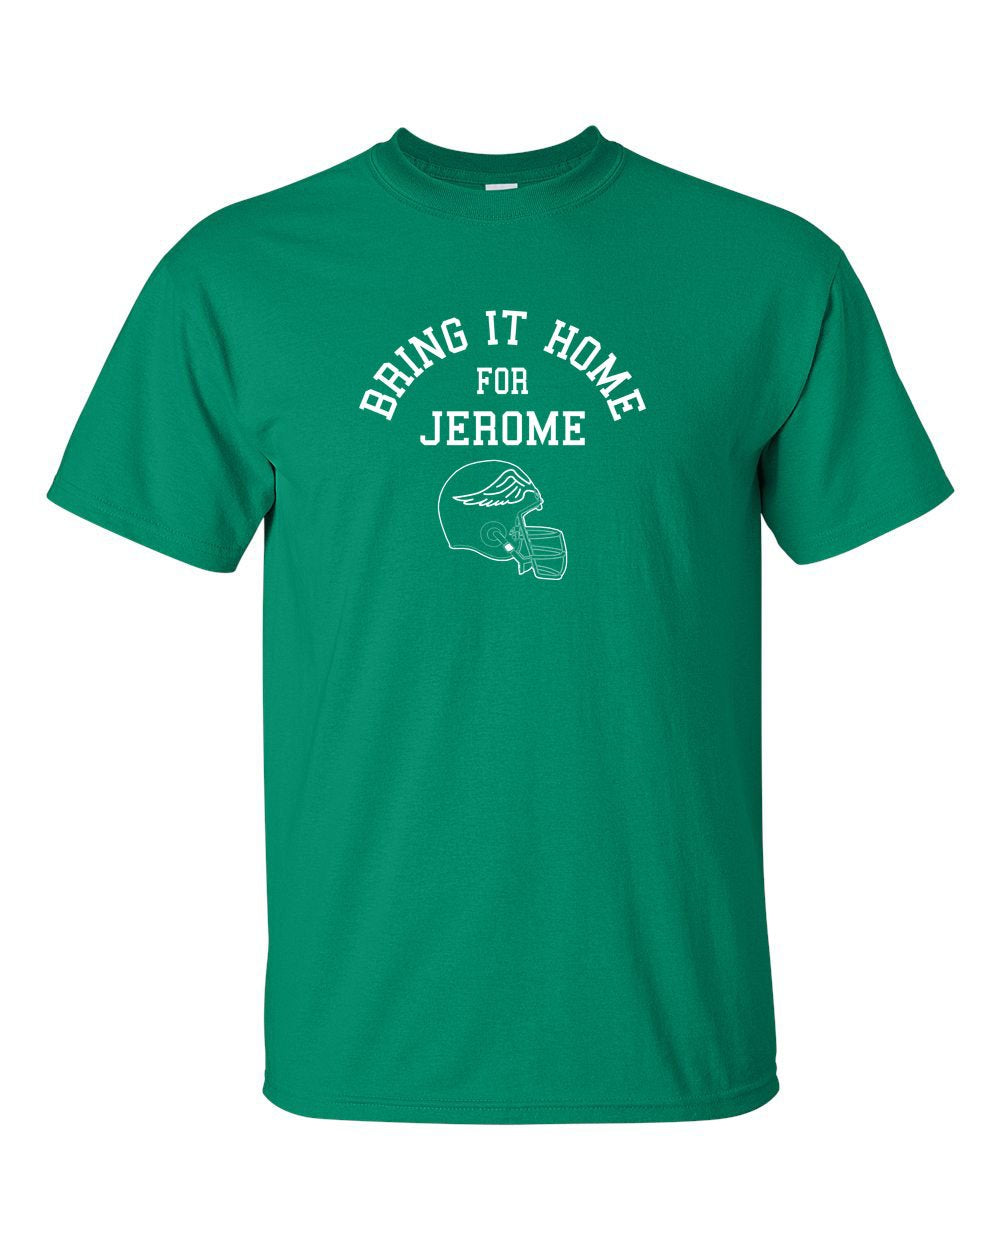 Bring It Home For Jerome Mens/Unisex T-Shirt